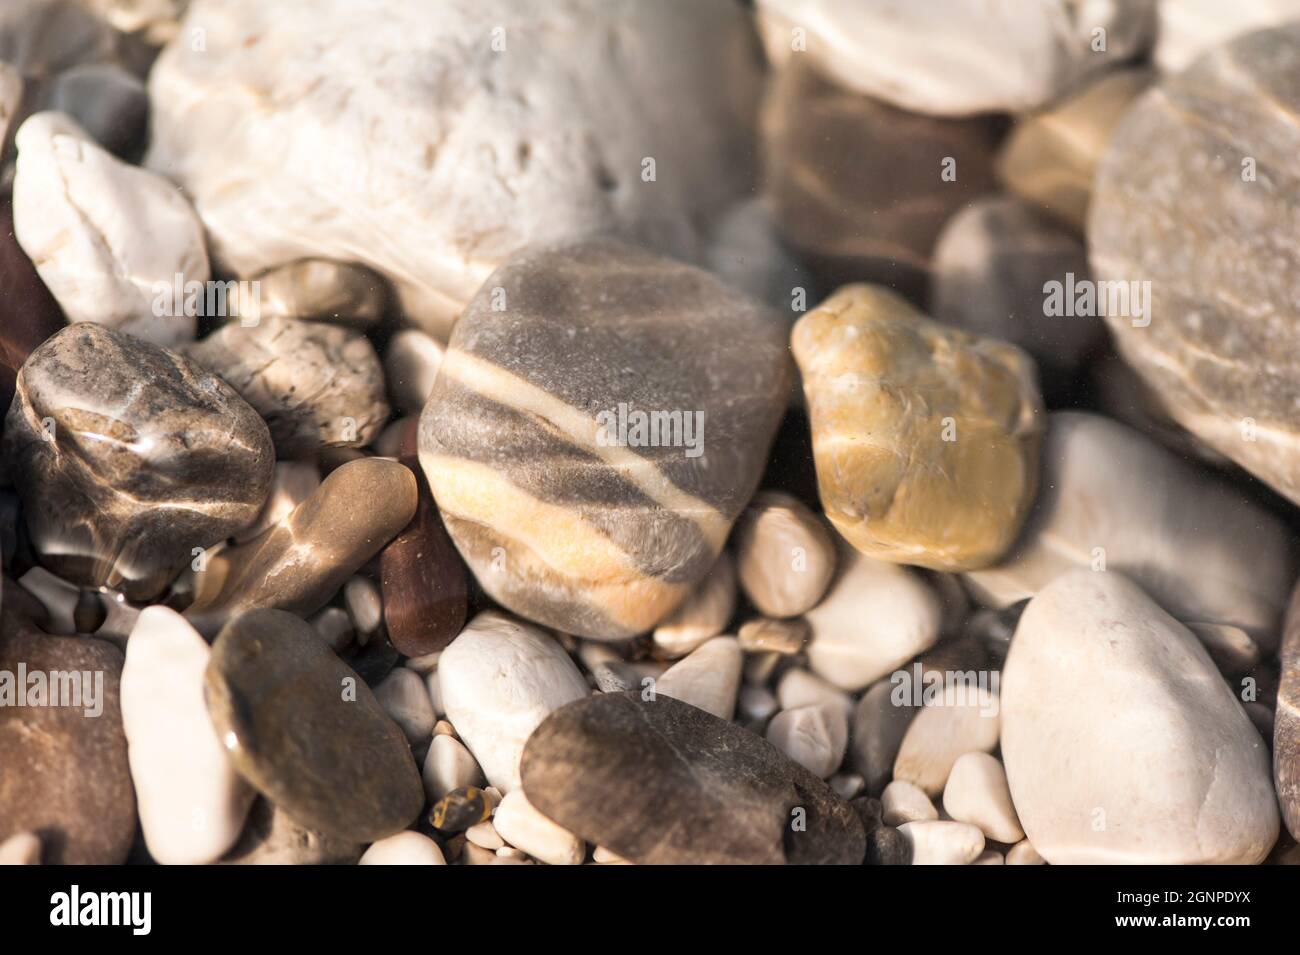 Underwater river stones in a close up image Stock Photo